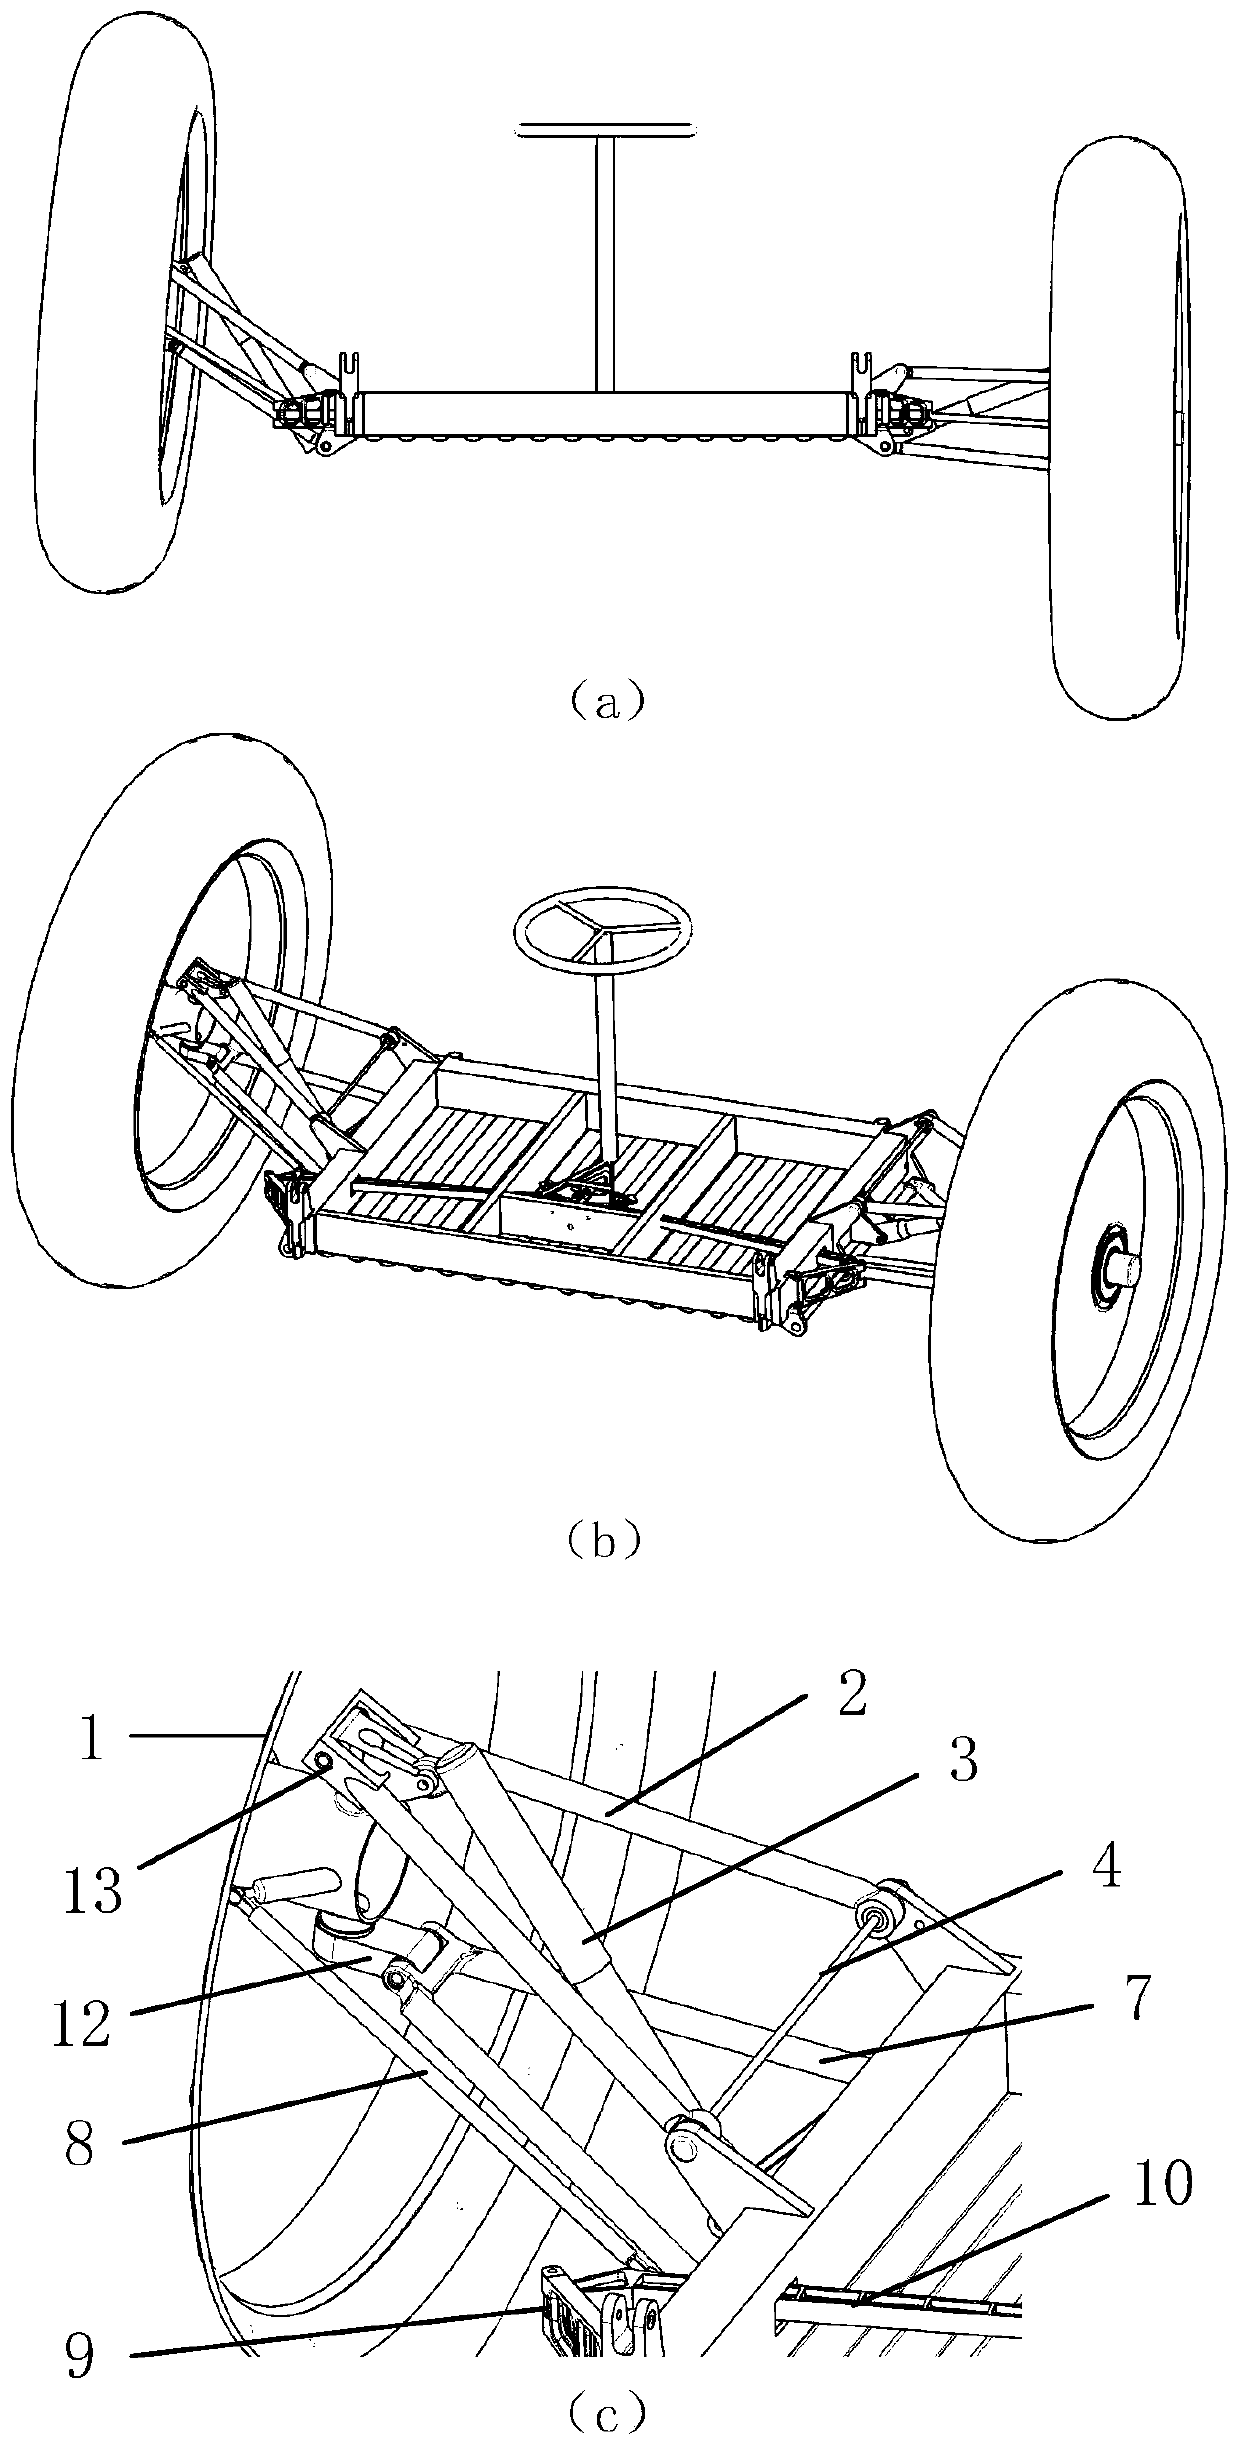 Multi-connecting-rod suspension mechanism with buffering, folding and steering functions